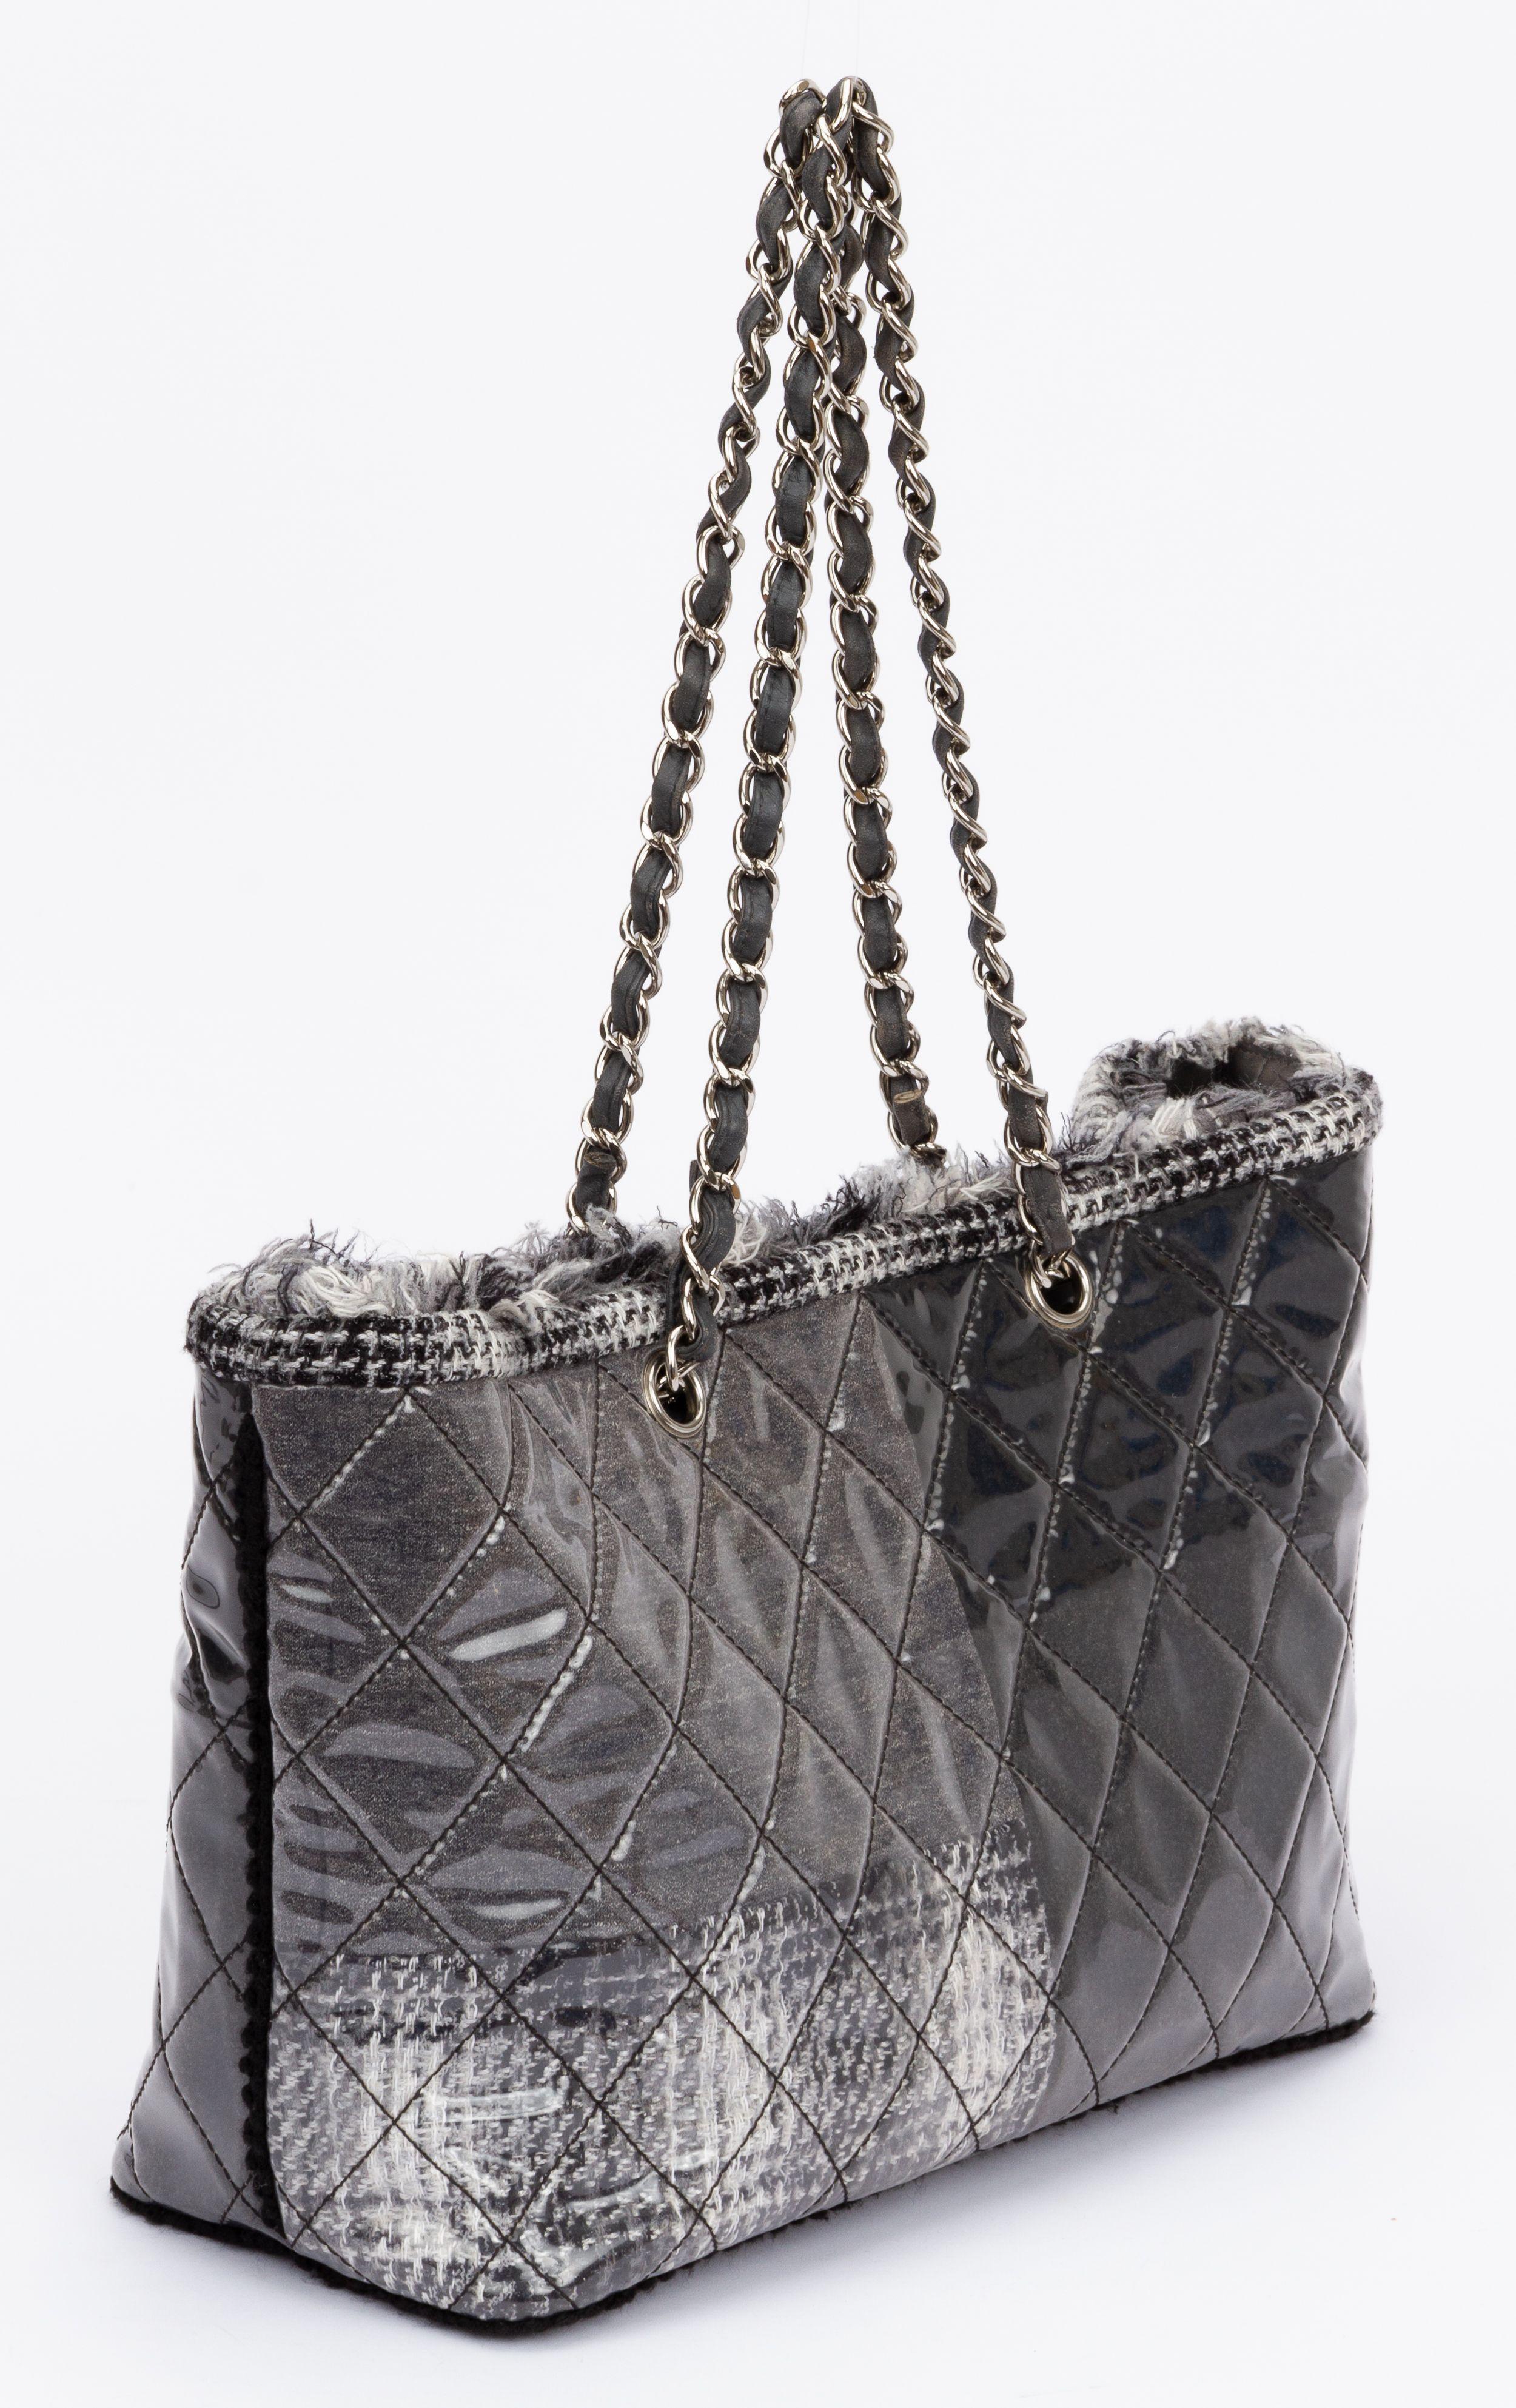 Chanel tote from the 2009 Karl Lagerfeld Collection. The bag is crafted of vinyl in silver grey and comes with a funny tweed pattern. It has fringe trim accent and silver-tone hardware. The shoulder chain has a drop of 10.25